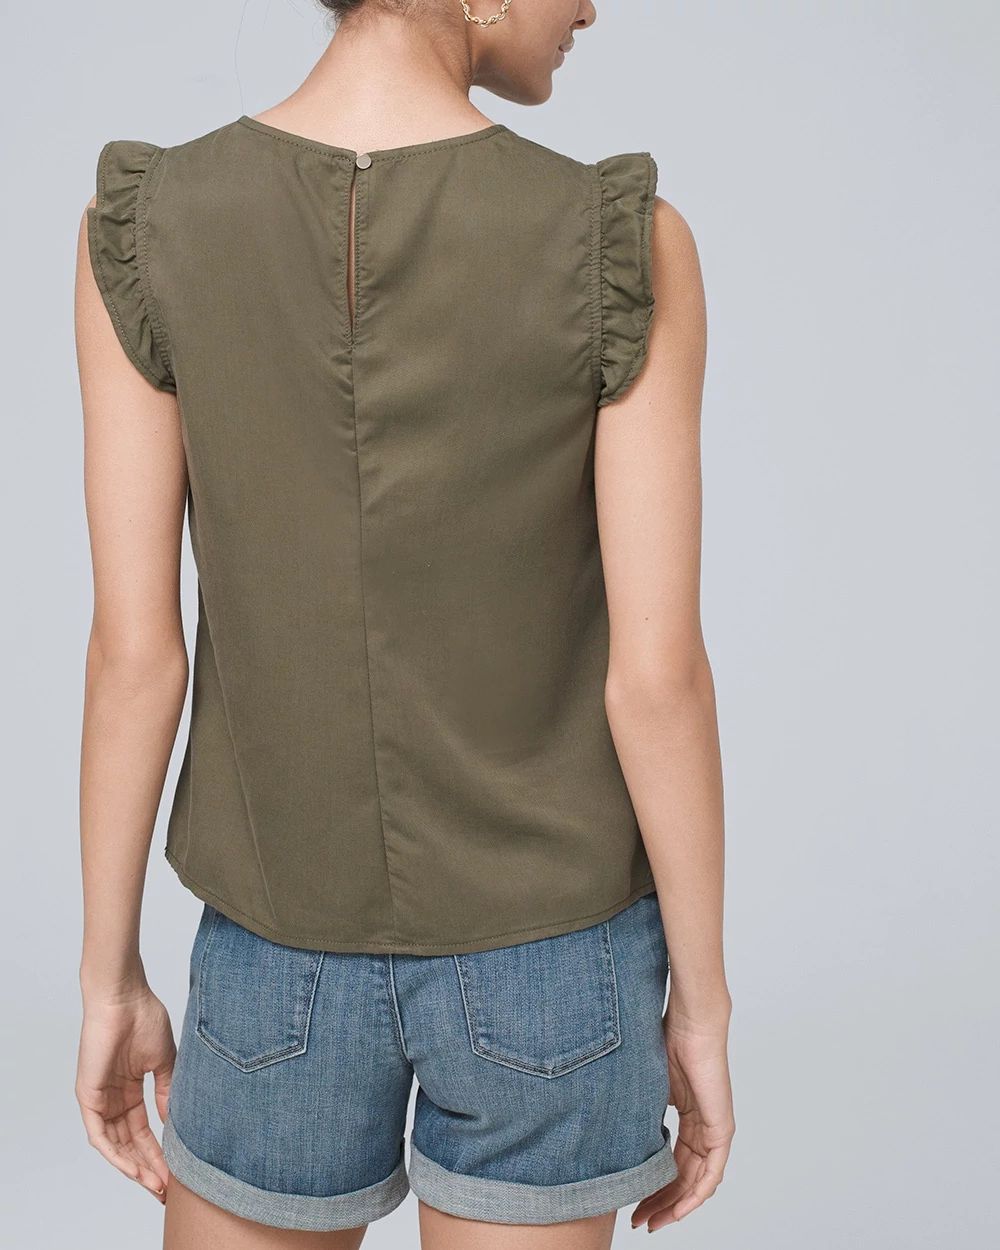 Silky Soft Denim Ruffle Top click to view larger image.